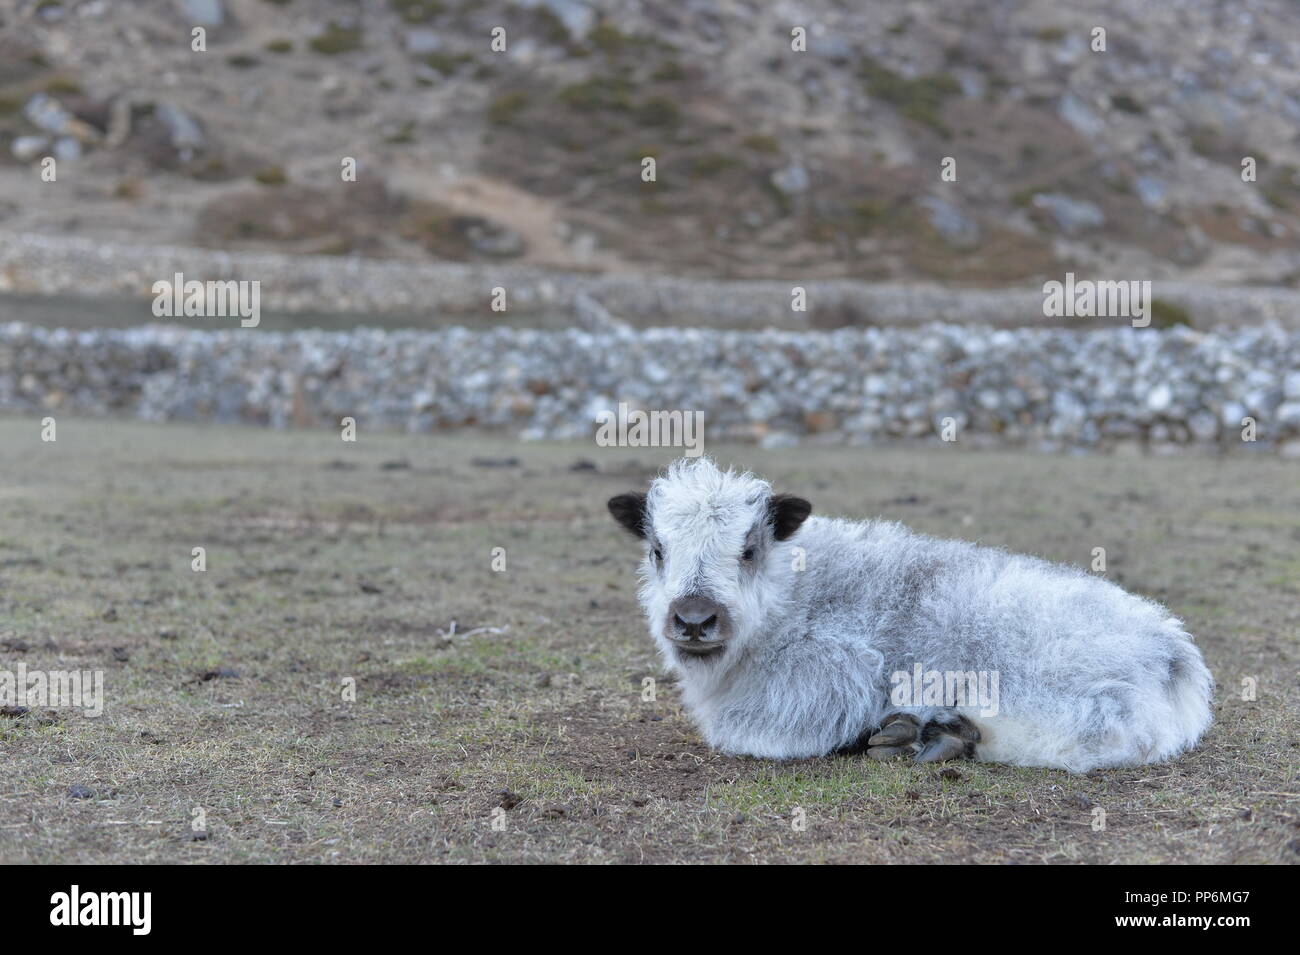 A baby yak in the middle of nowhere. Himalayan region, Nepal Stock Photo